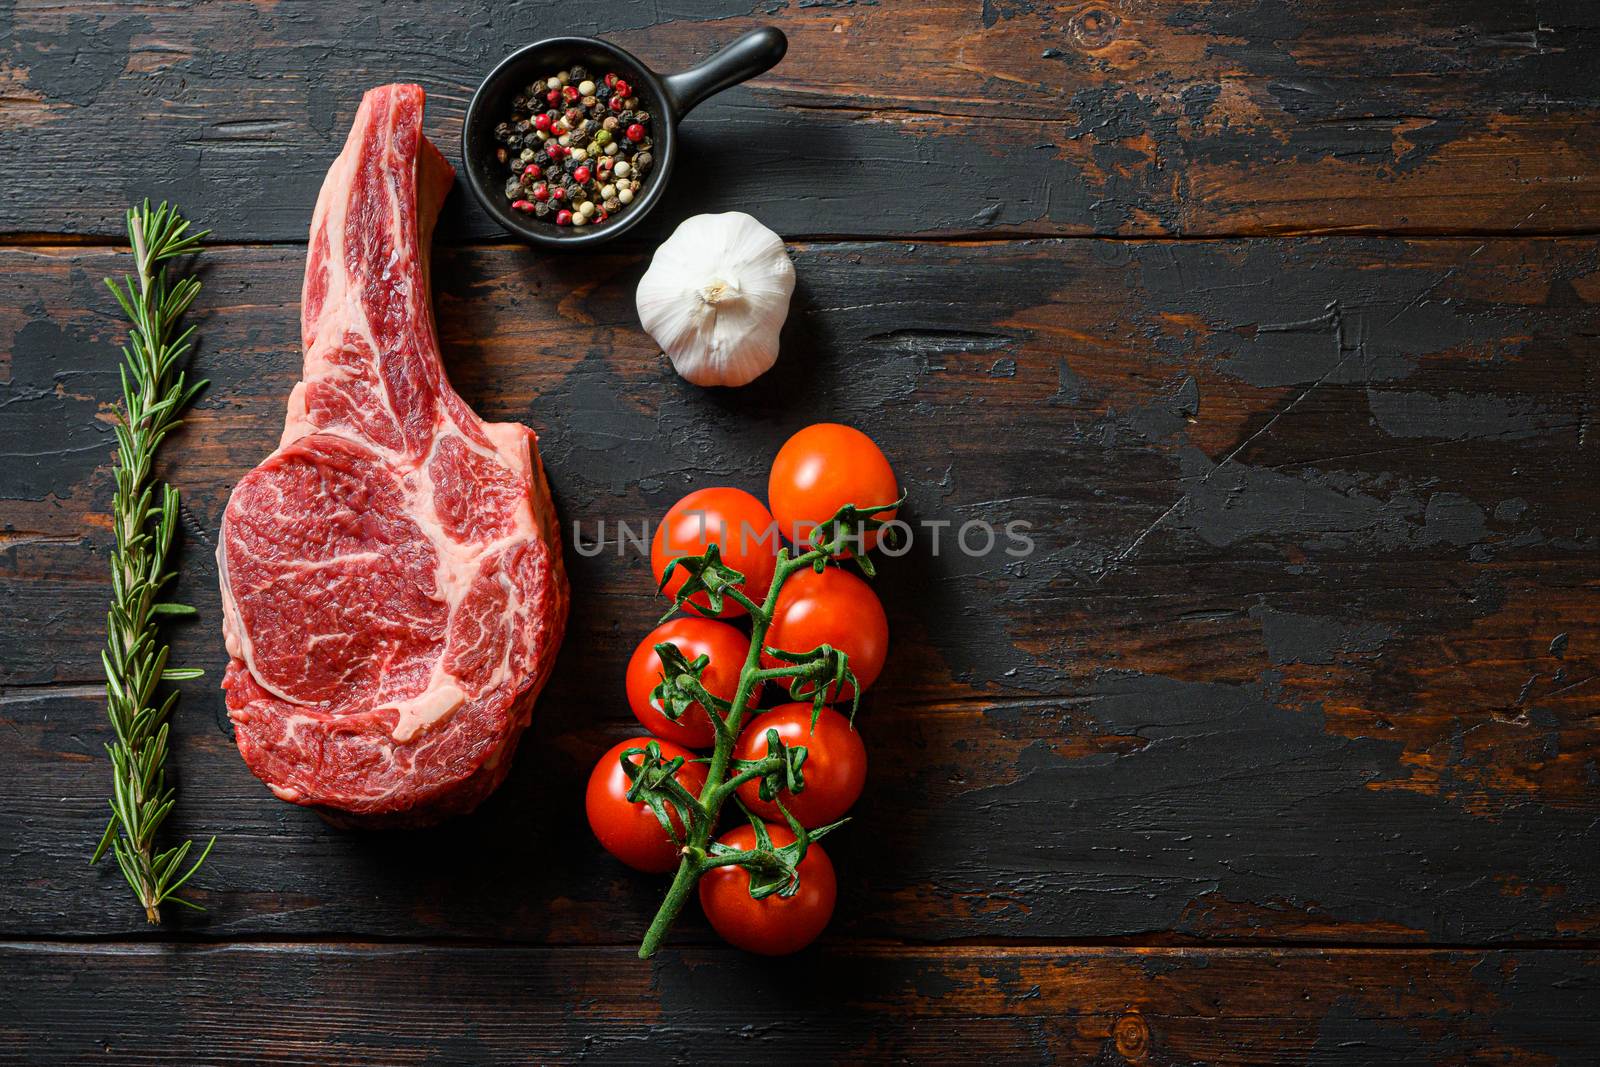 Raw uncooked black angus Dallas steak in rustic style on wooden table background. with tomato garlic herbs and peppercorns rosemary space for text top view by Ilianesolenyi